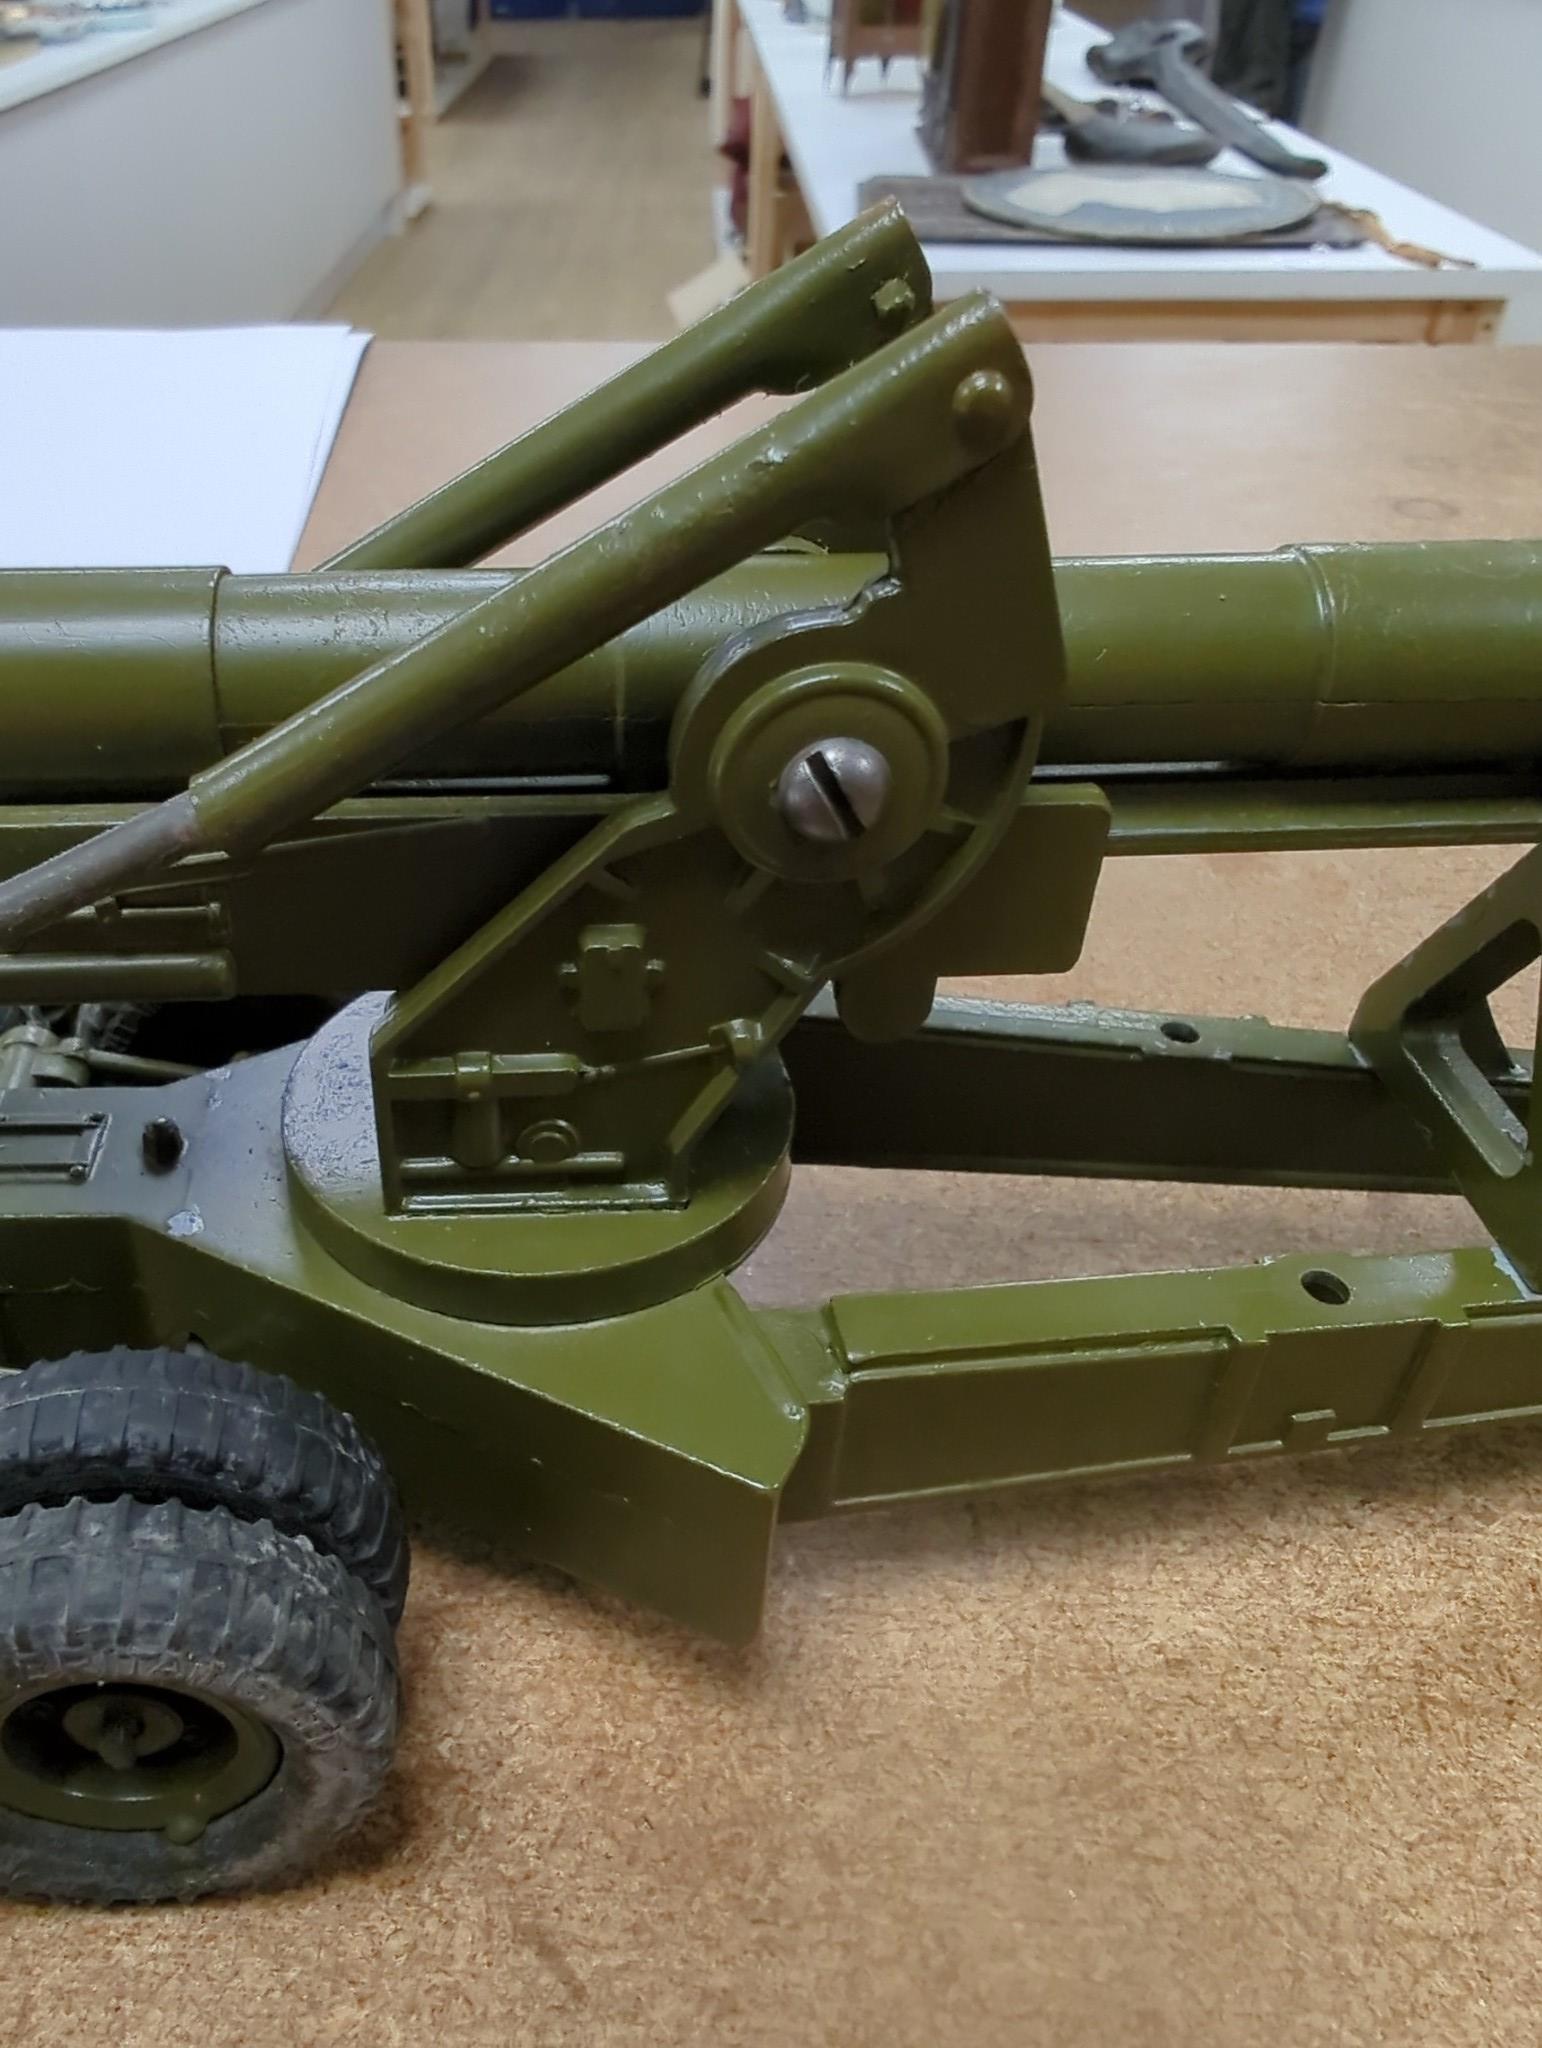 A selection of various Dinky military toys and a boxed Britains 155mm gun